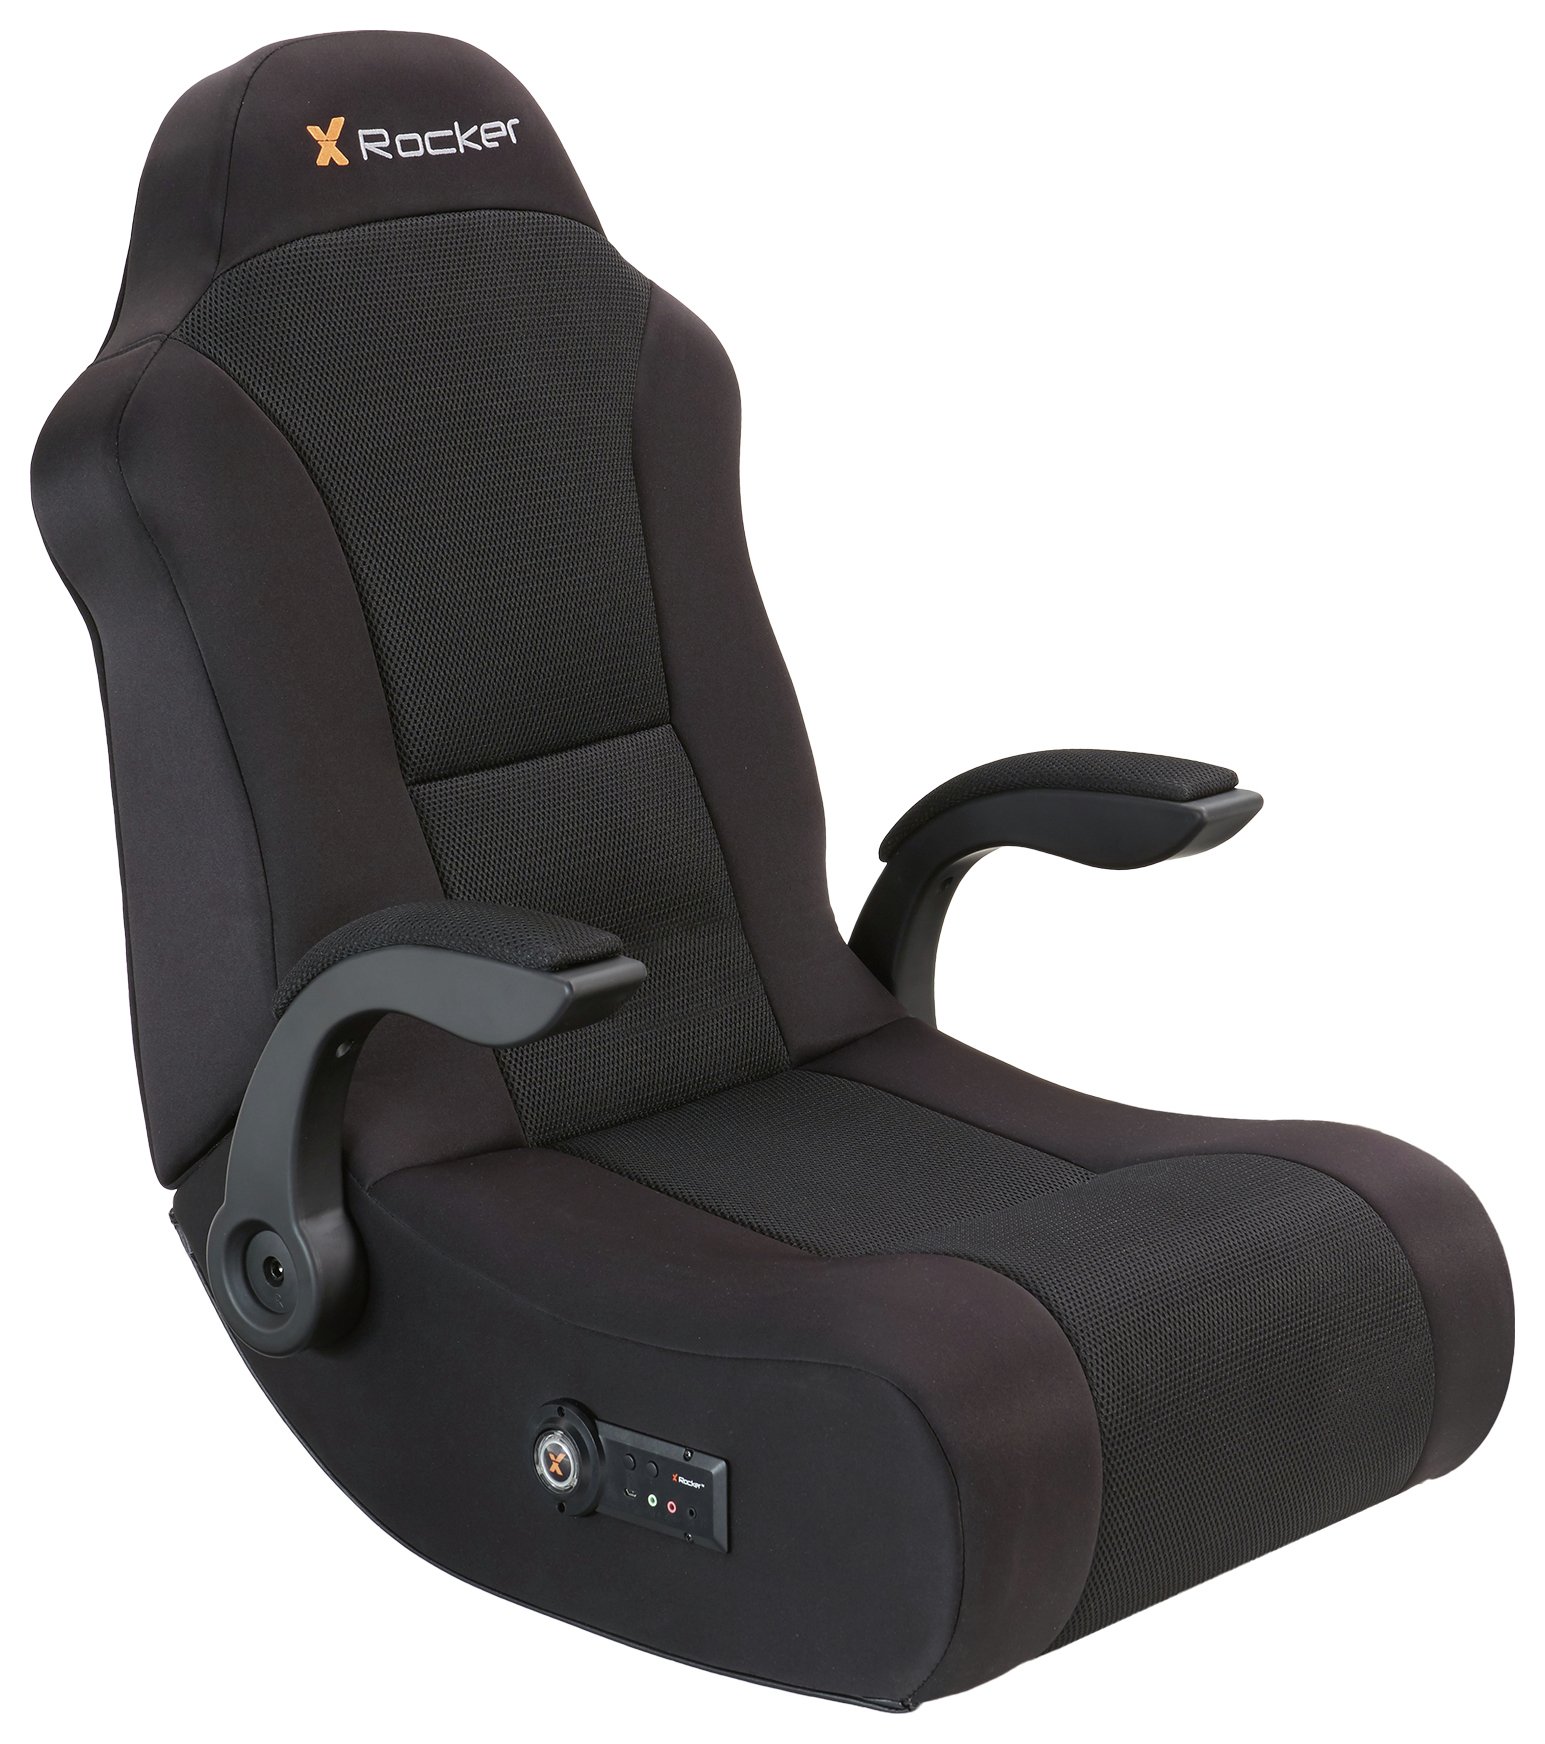 XRocker Mission Gaming Chair PS4 & Xbox One. Review